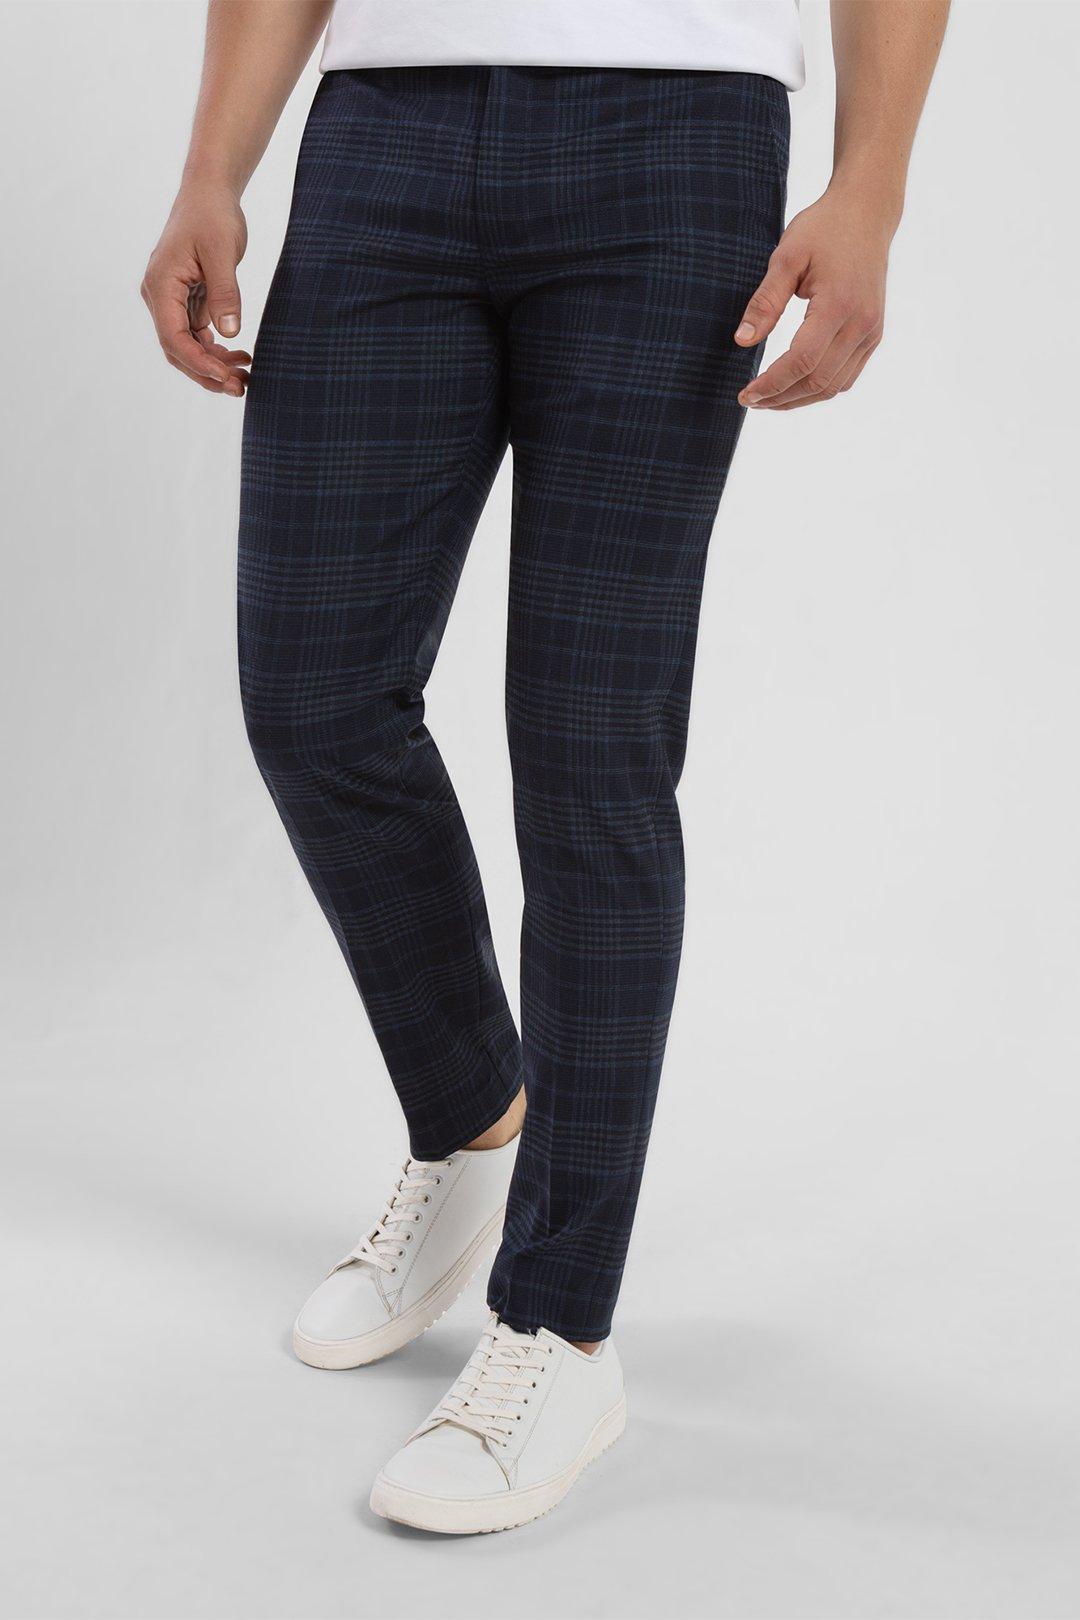 Men's Checked Smart Trousers | M&S